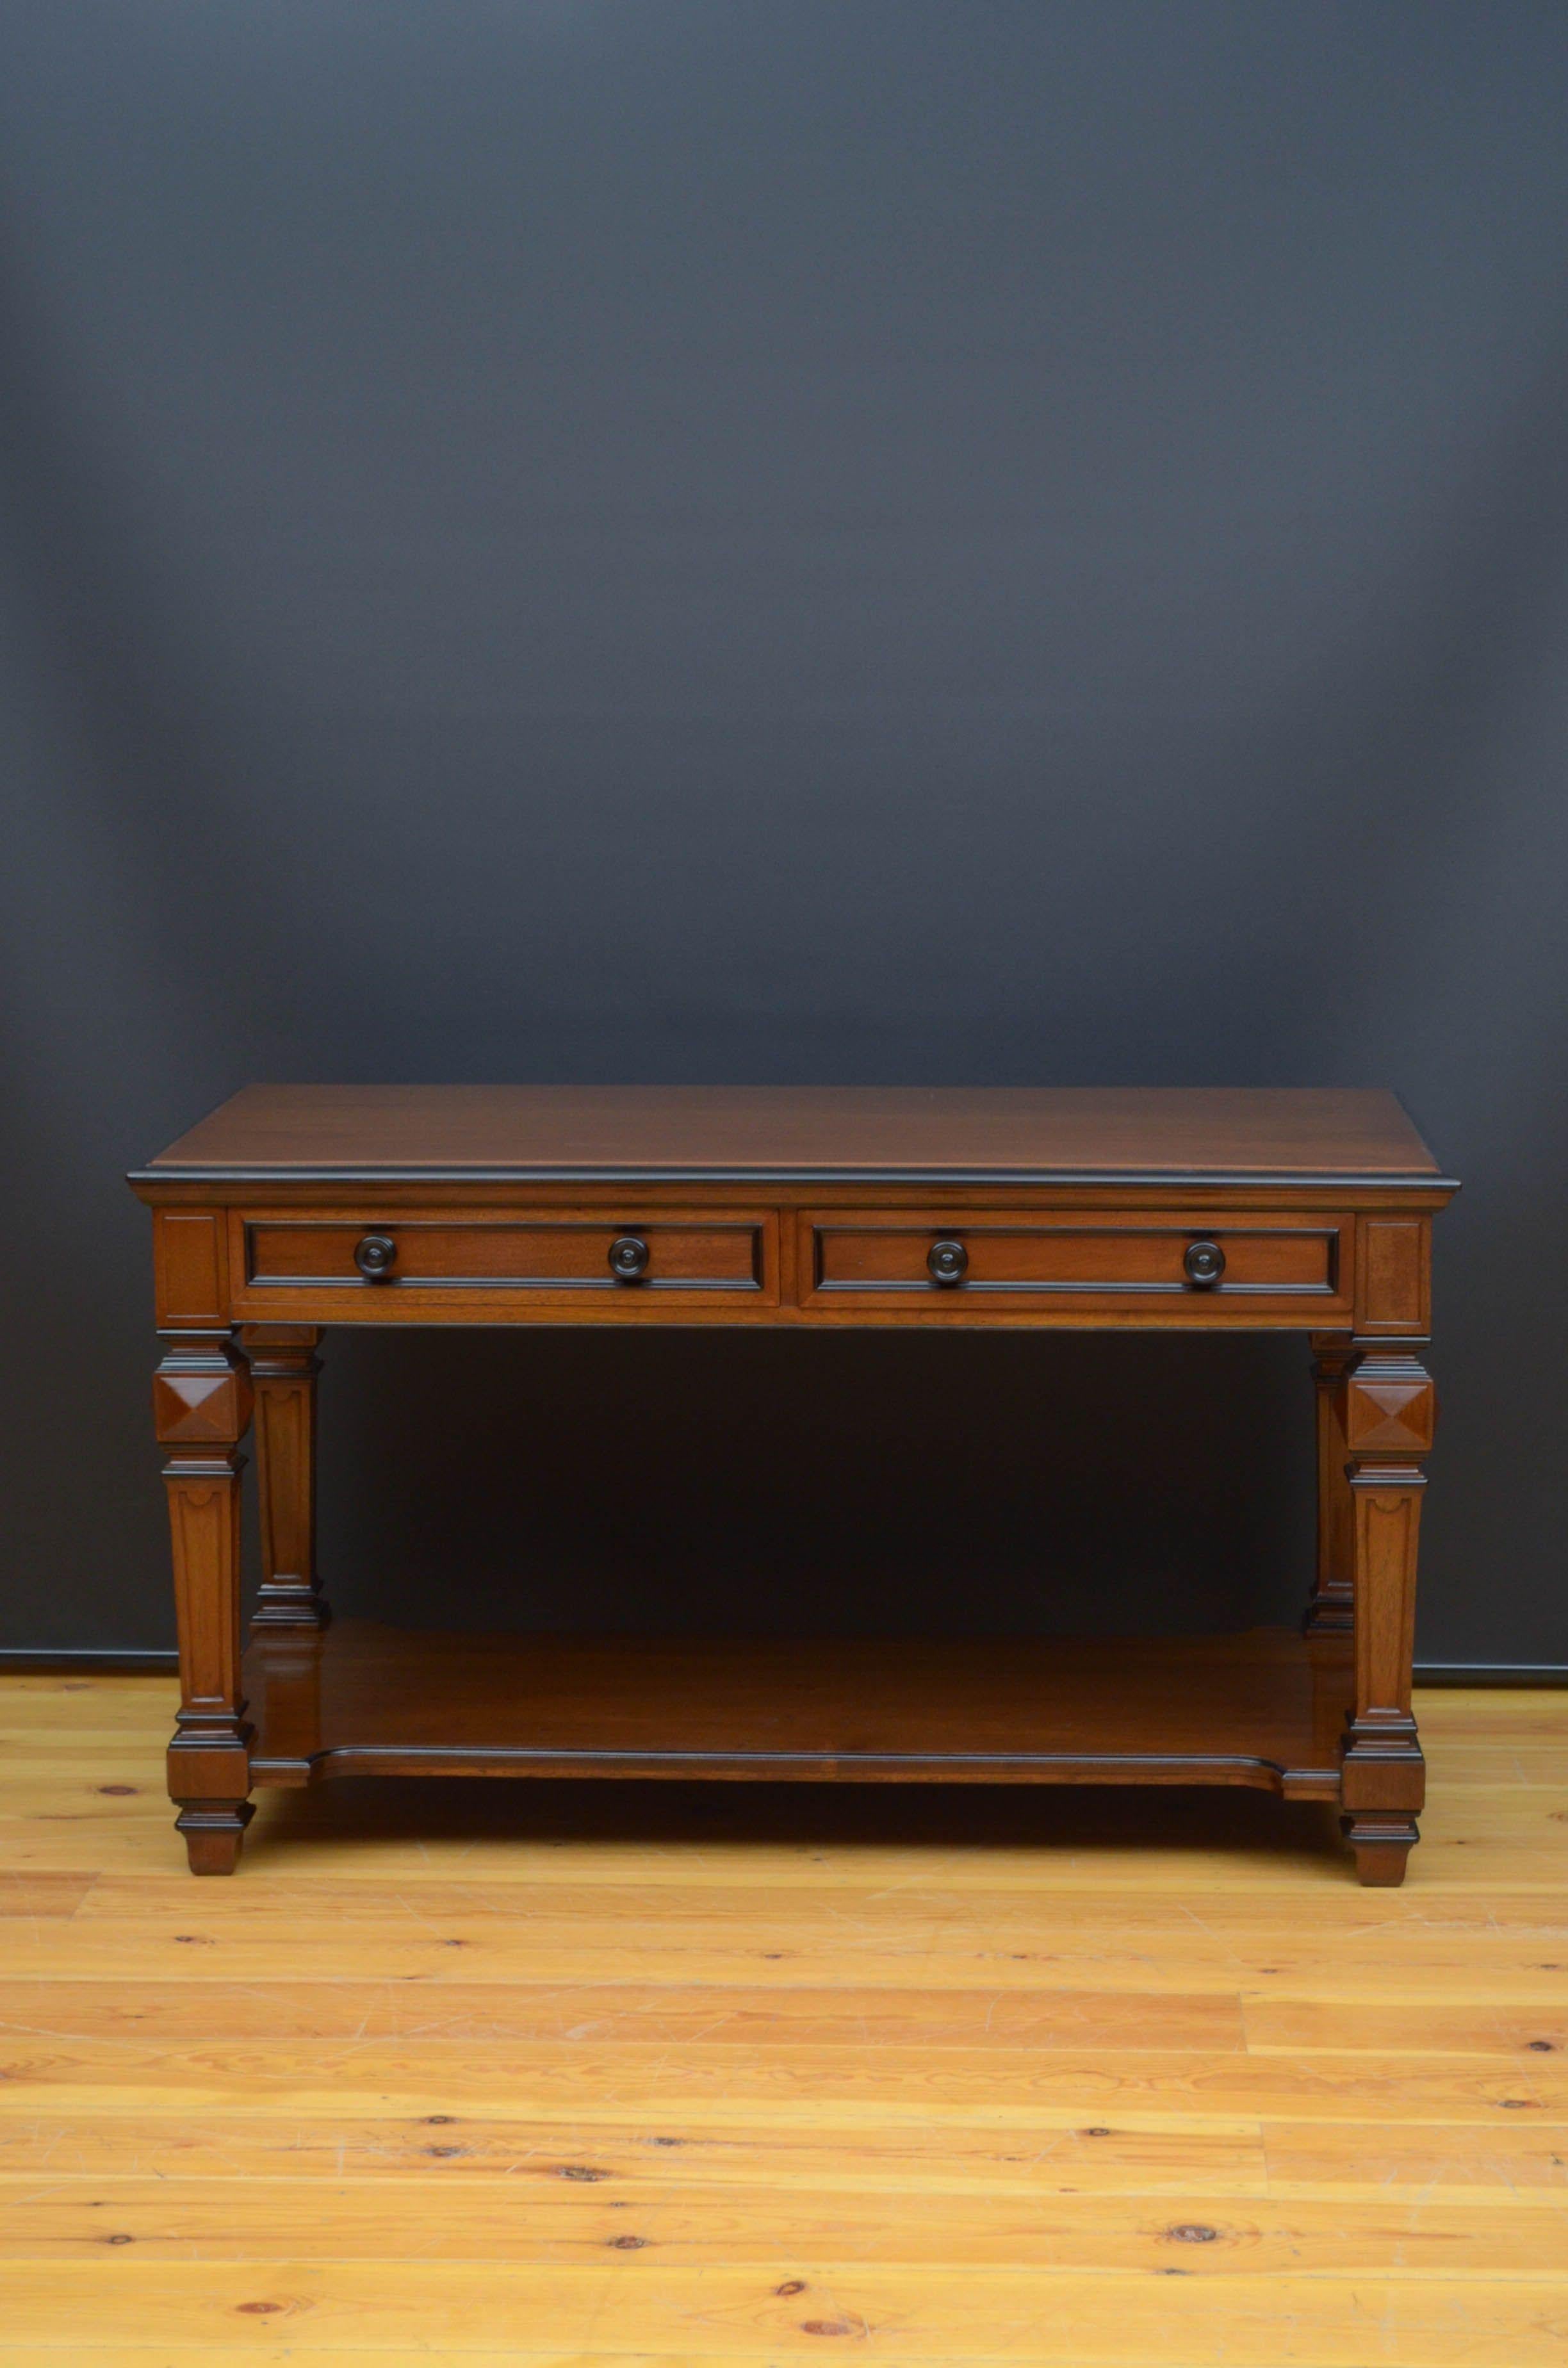 R05 impressive Edwards & Roberts walnut table, having figured top with moulded and ebonised edge above two panelled frieze drawers fitted with original ebonised knobs, all standing on substantial, carved legs with diamond shaped decoration